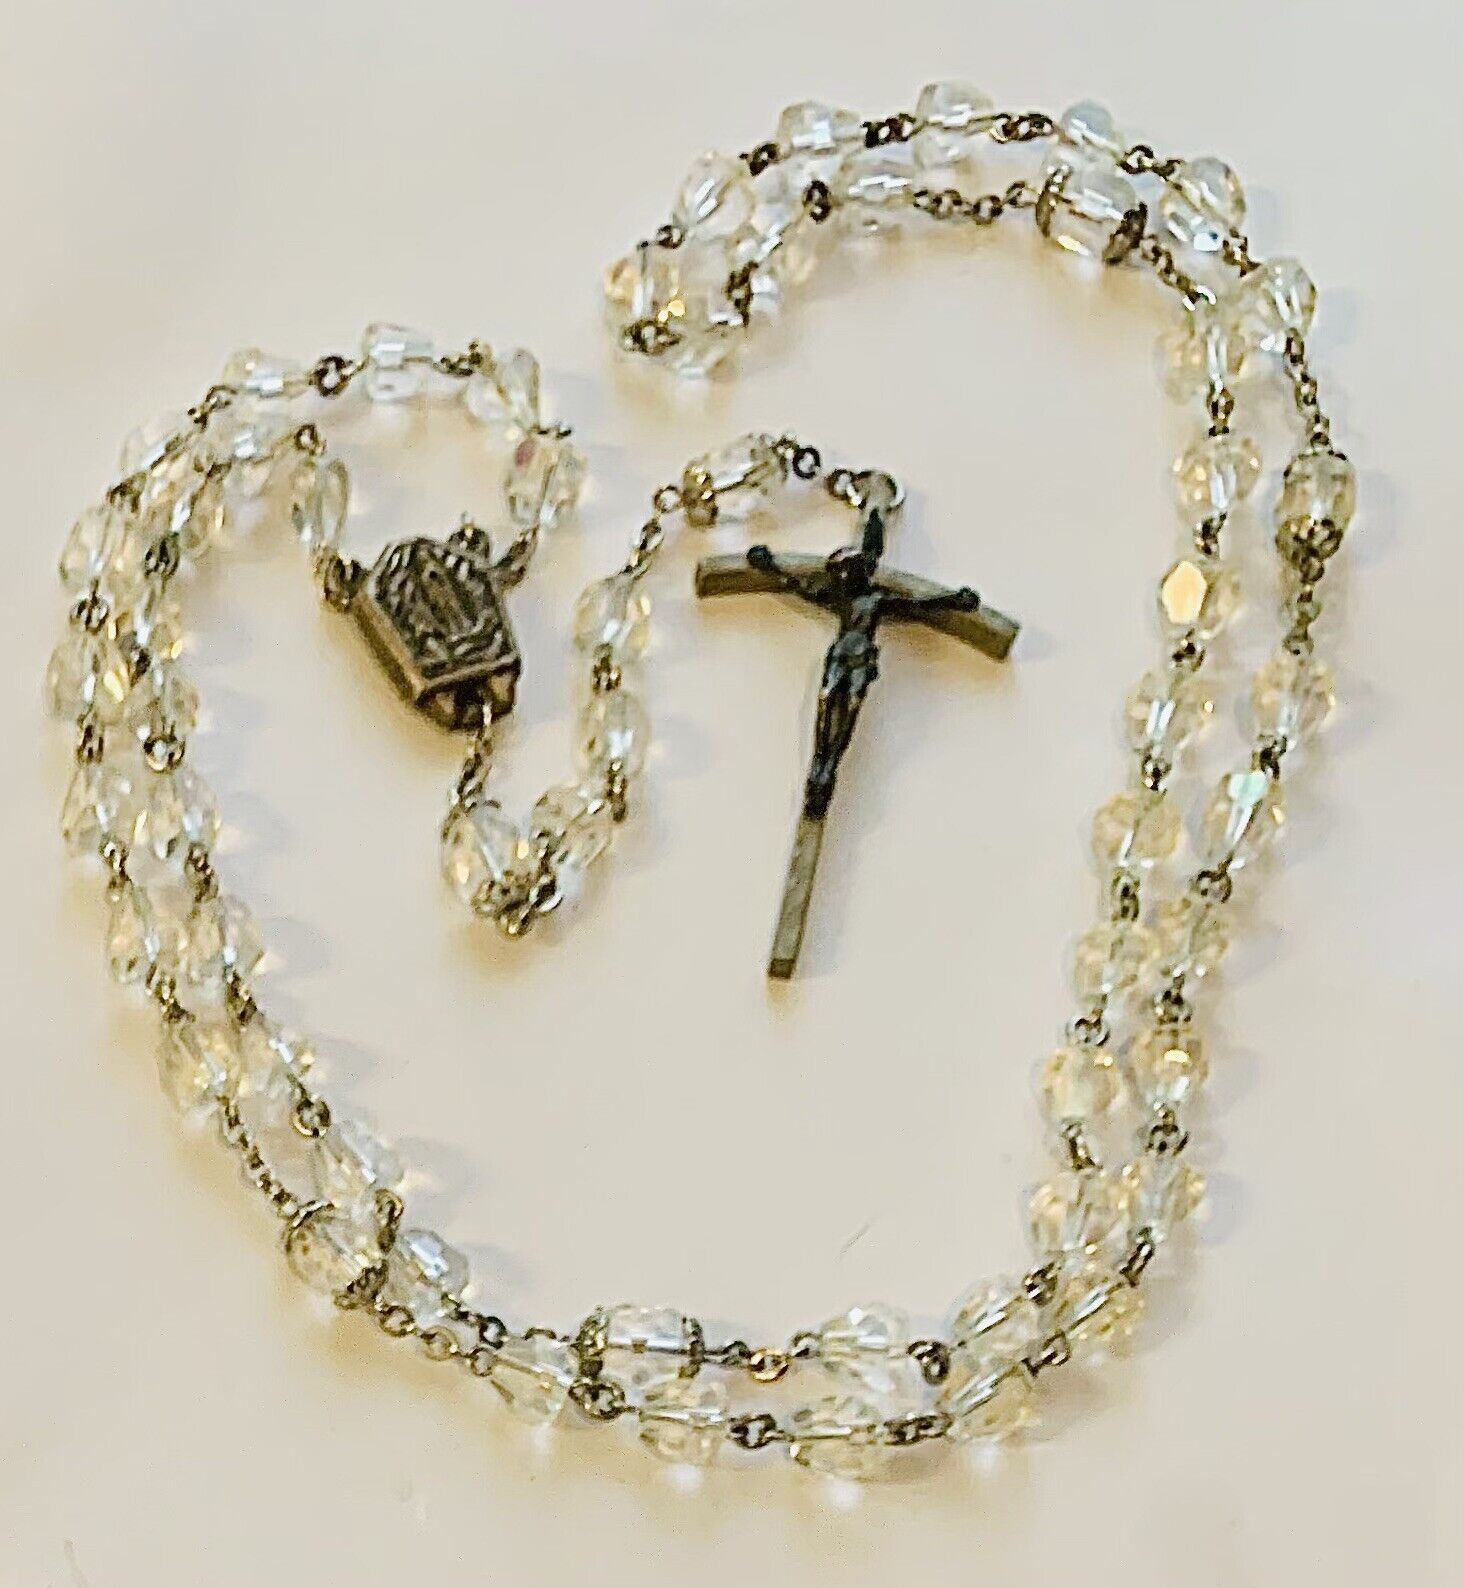 Refurbished Antique/Vintage Catholic Our Lady Of Lourdes Water Reliquary Rosary